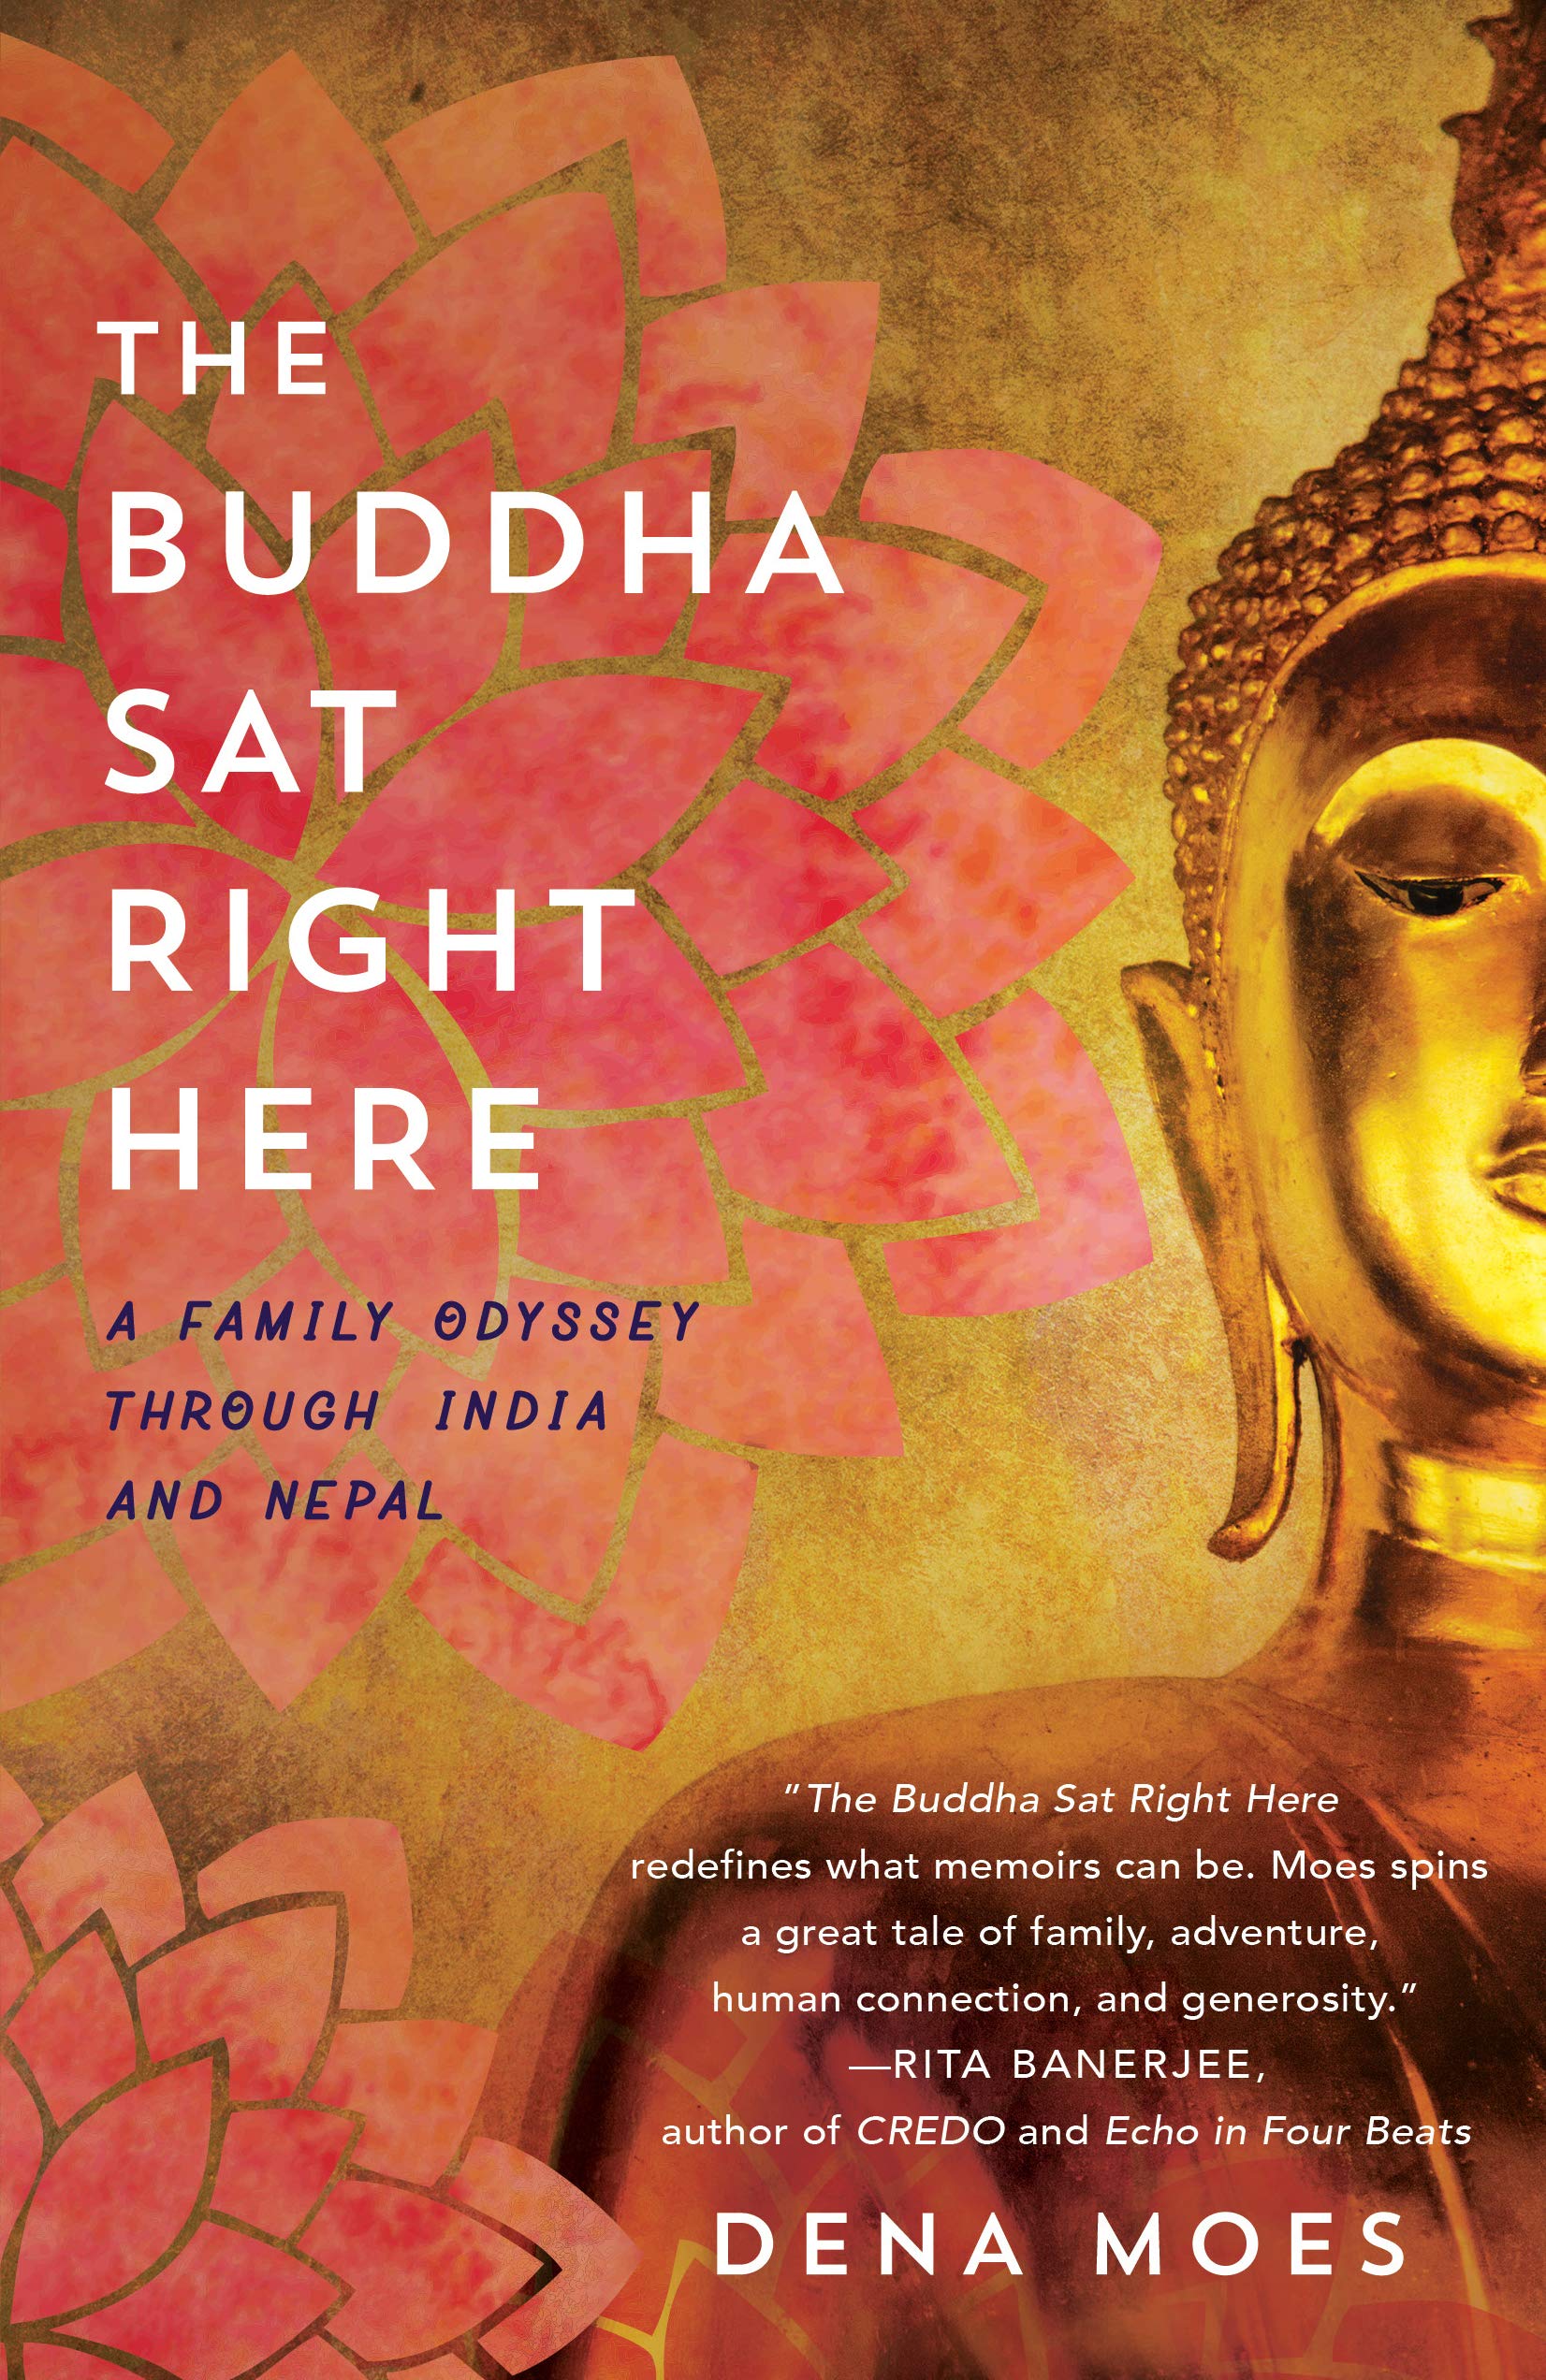 The Buddha Sat Right Here: A Family Odyssey Through India and Nepal